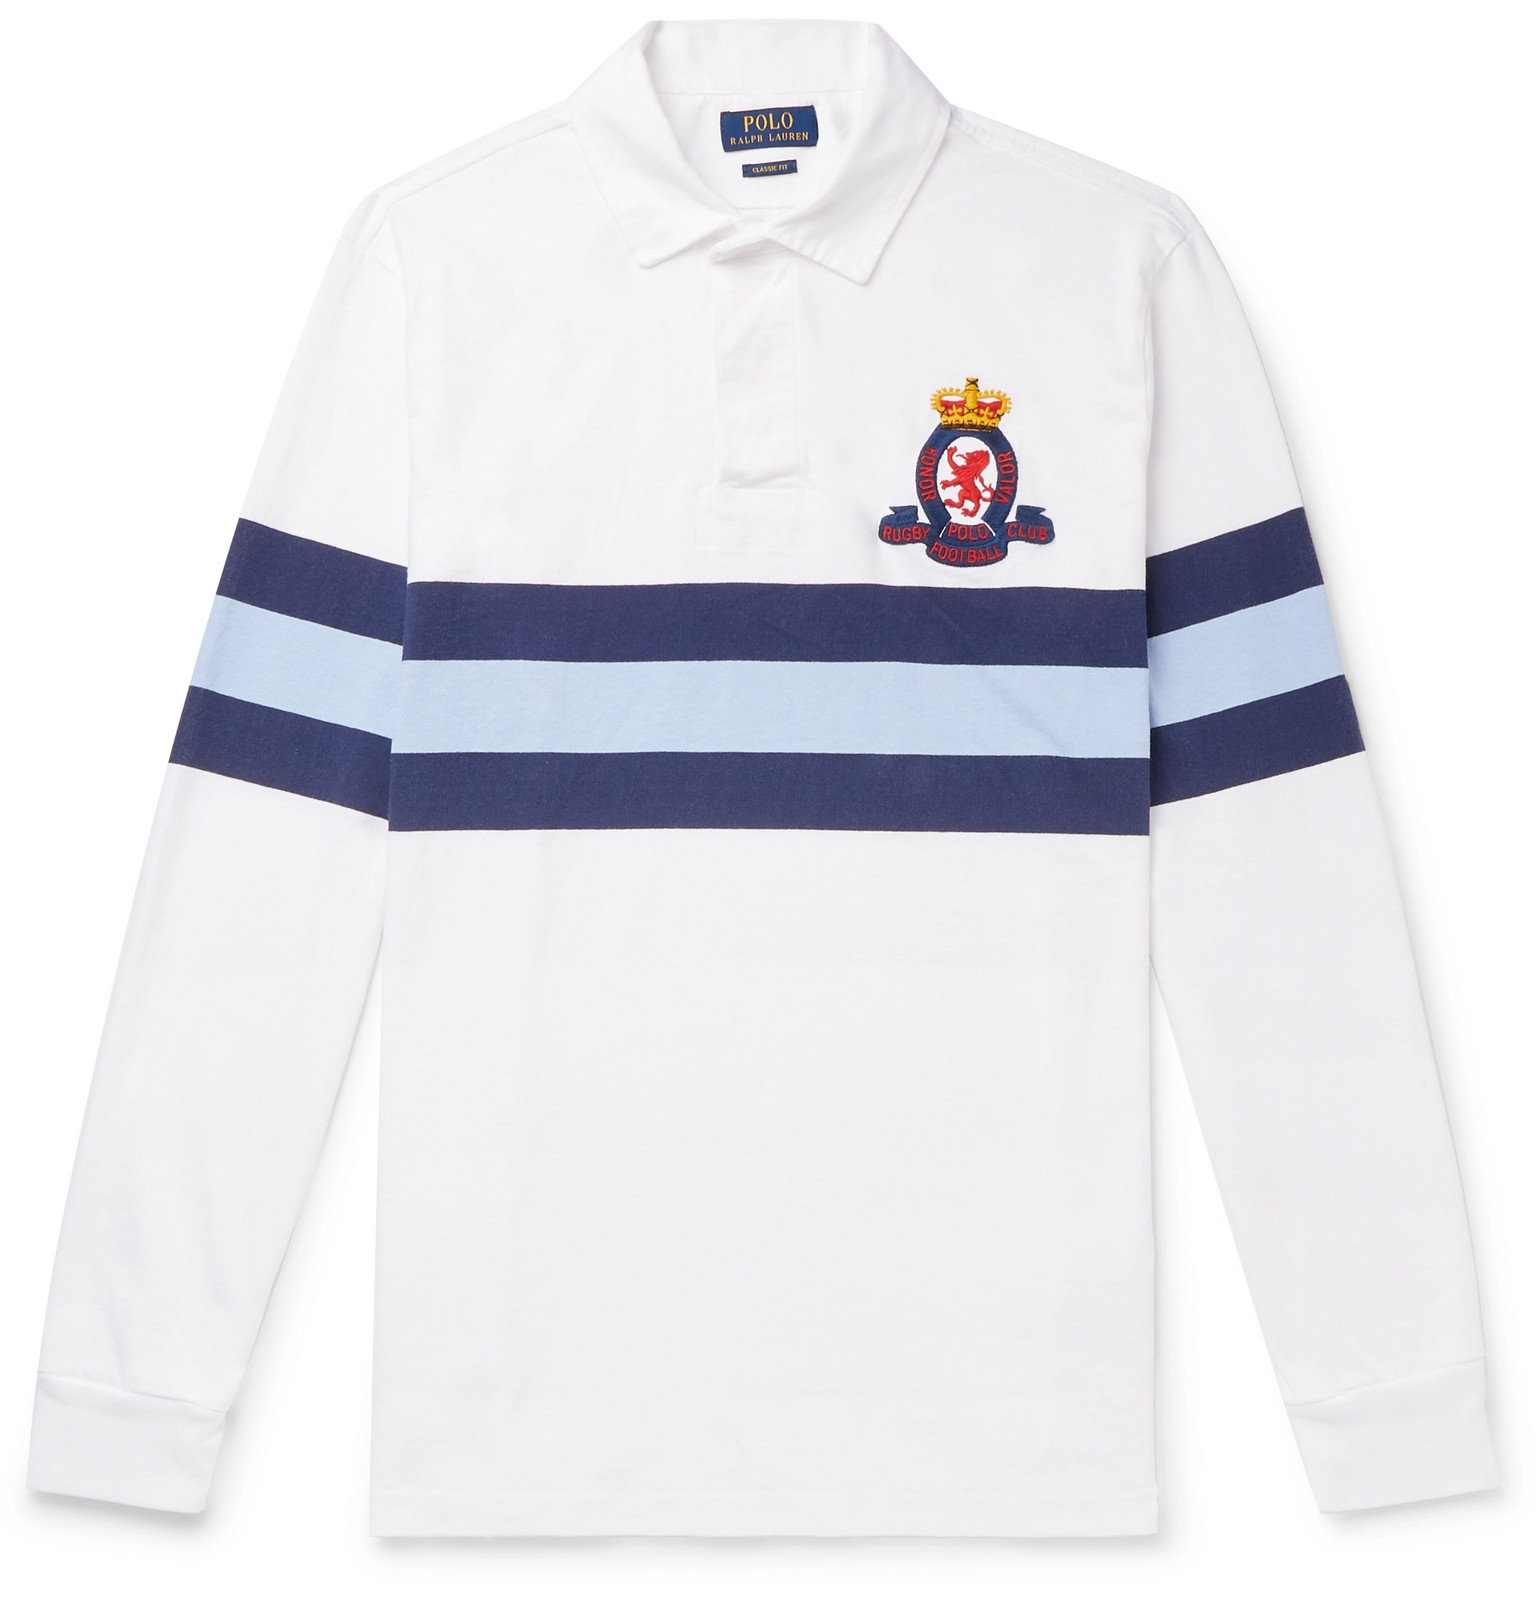 polo ralph lauren rugby jersey